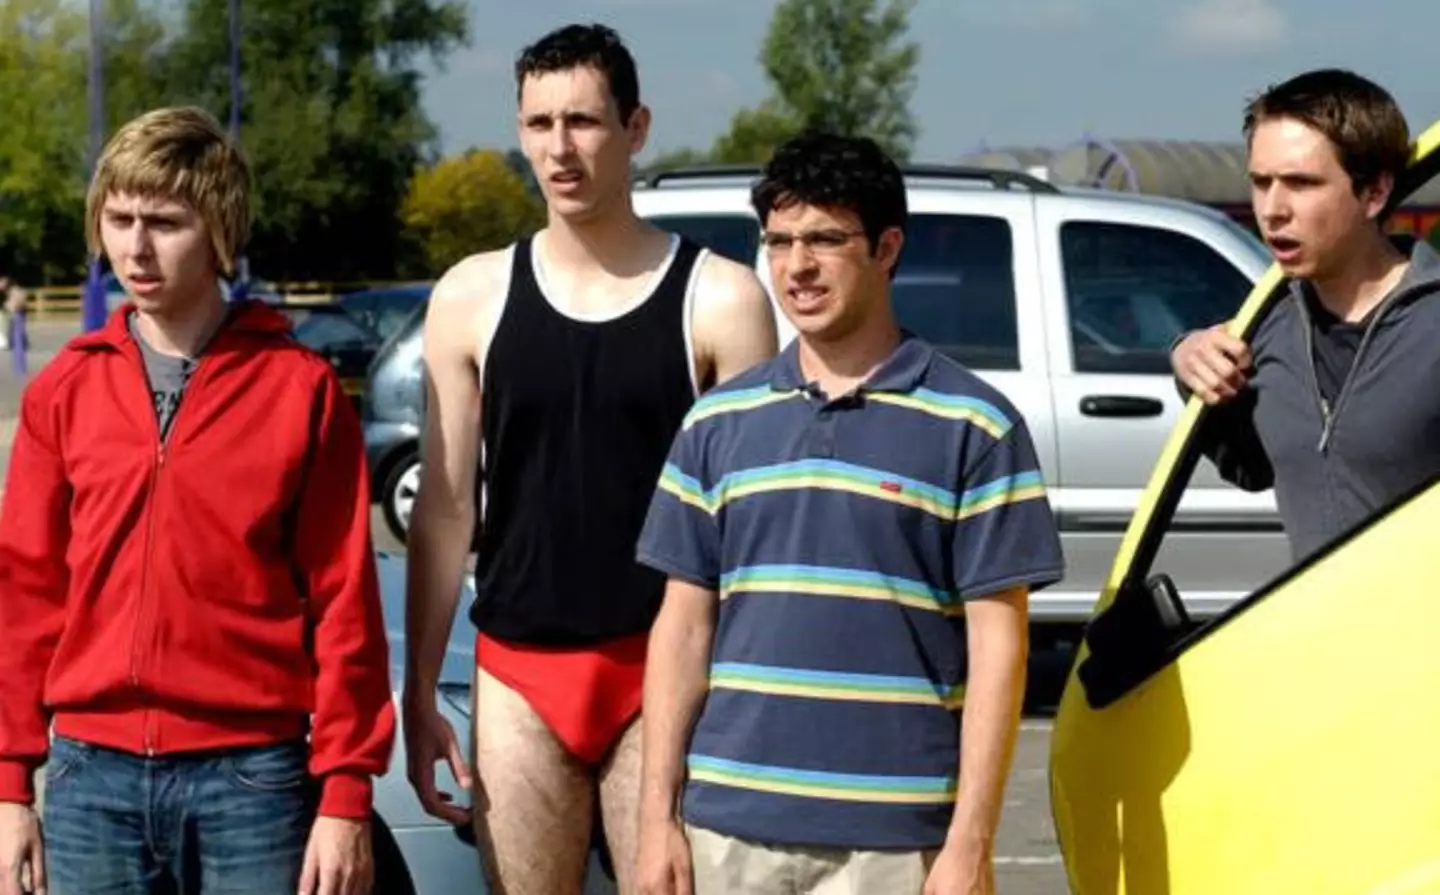 Kids are growing up in a very different time today than back in The Inbetweeners days.